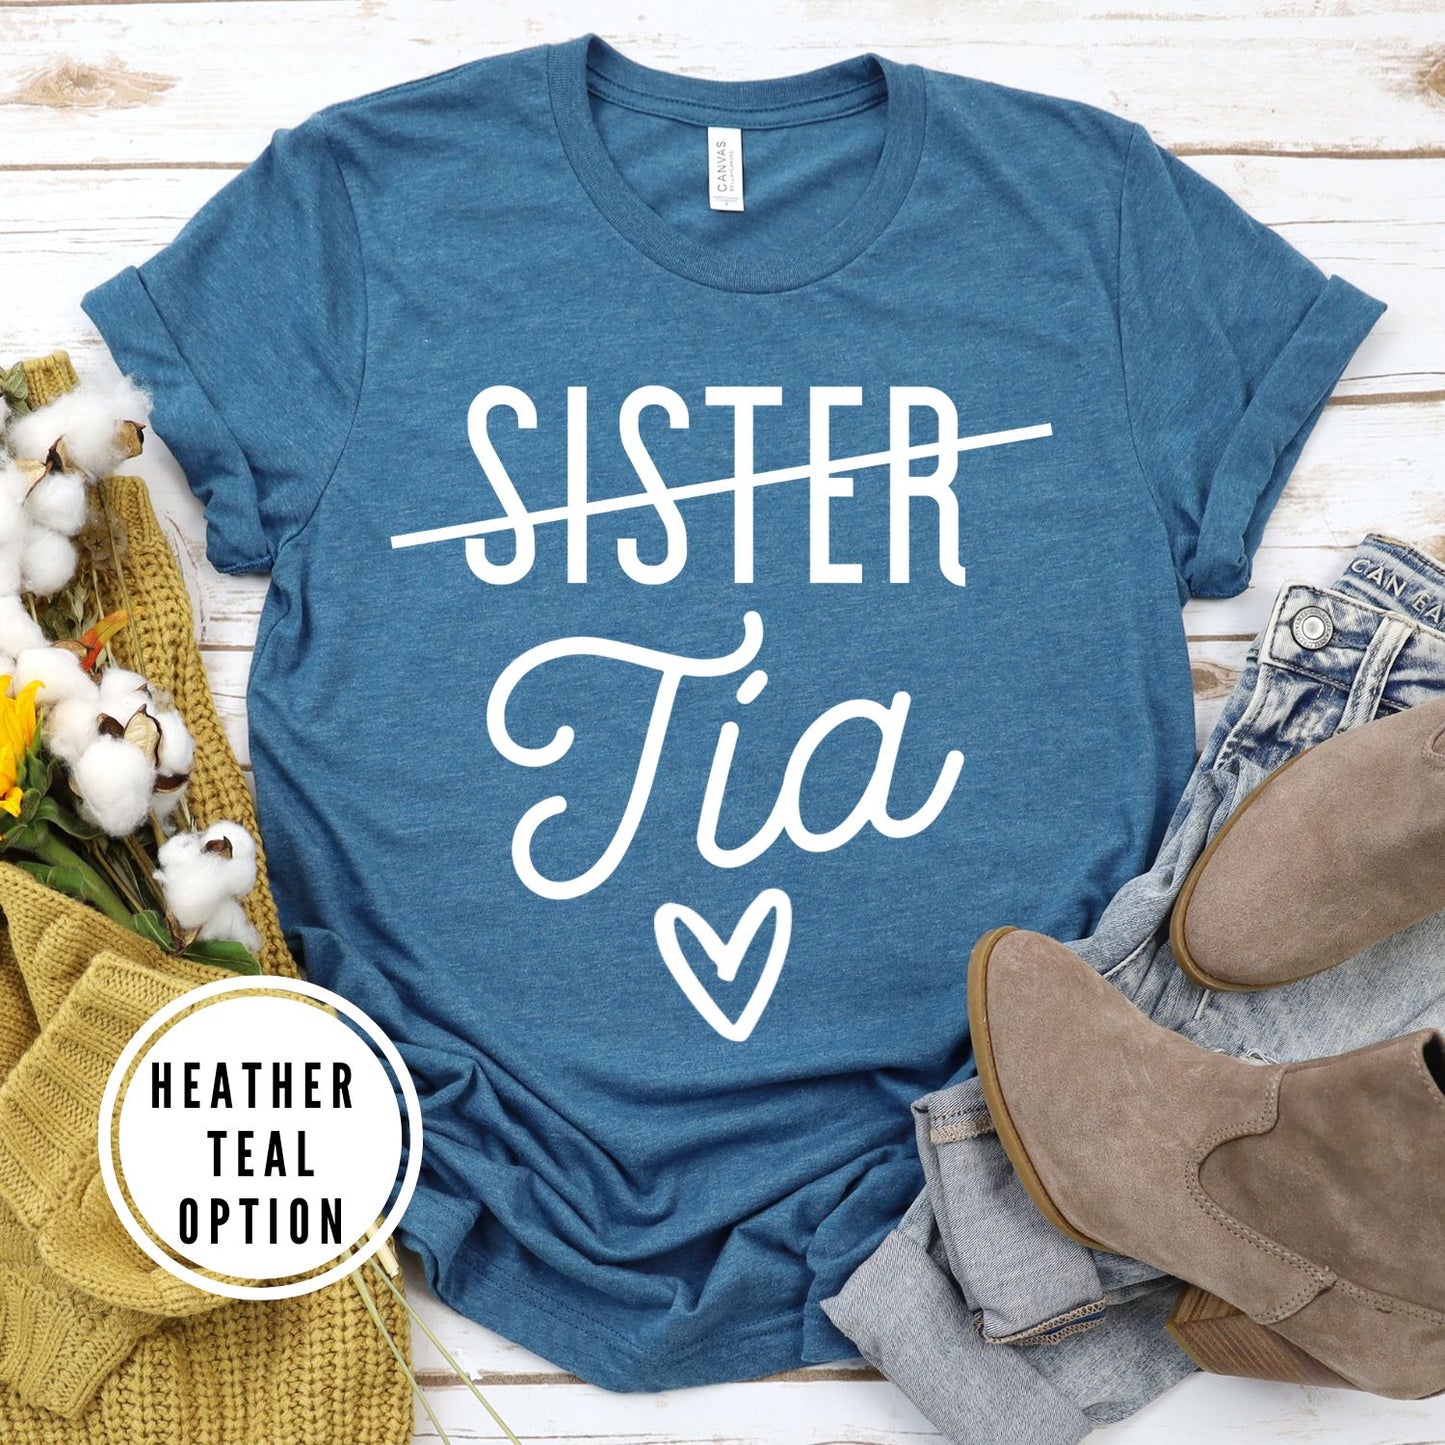 From Sister to Tia